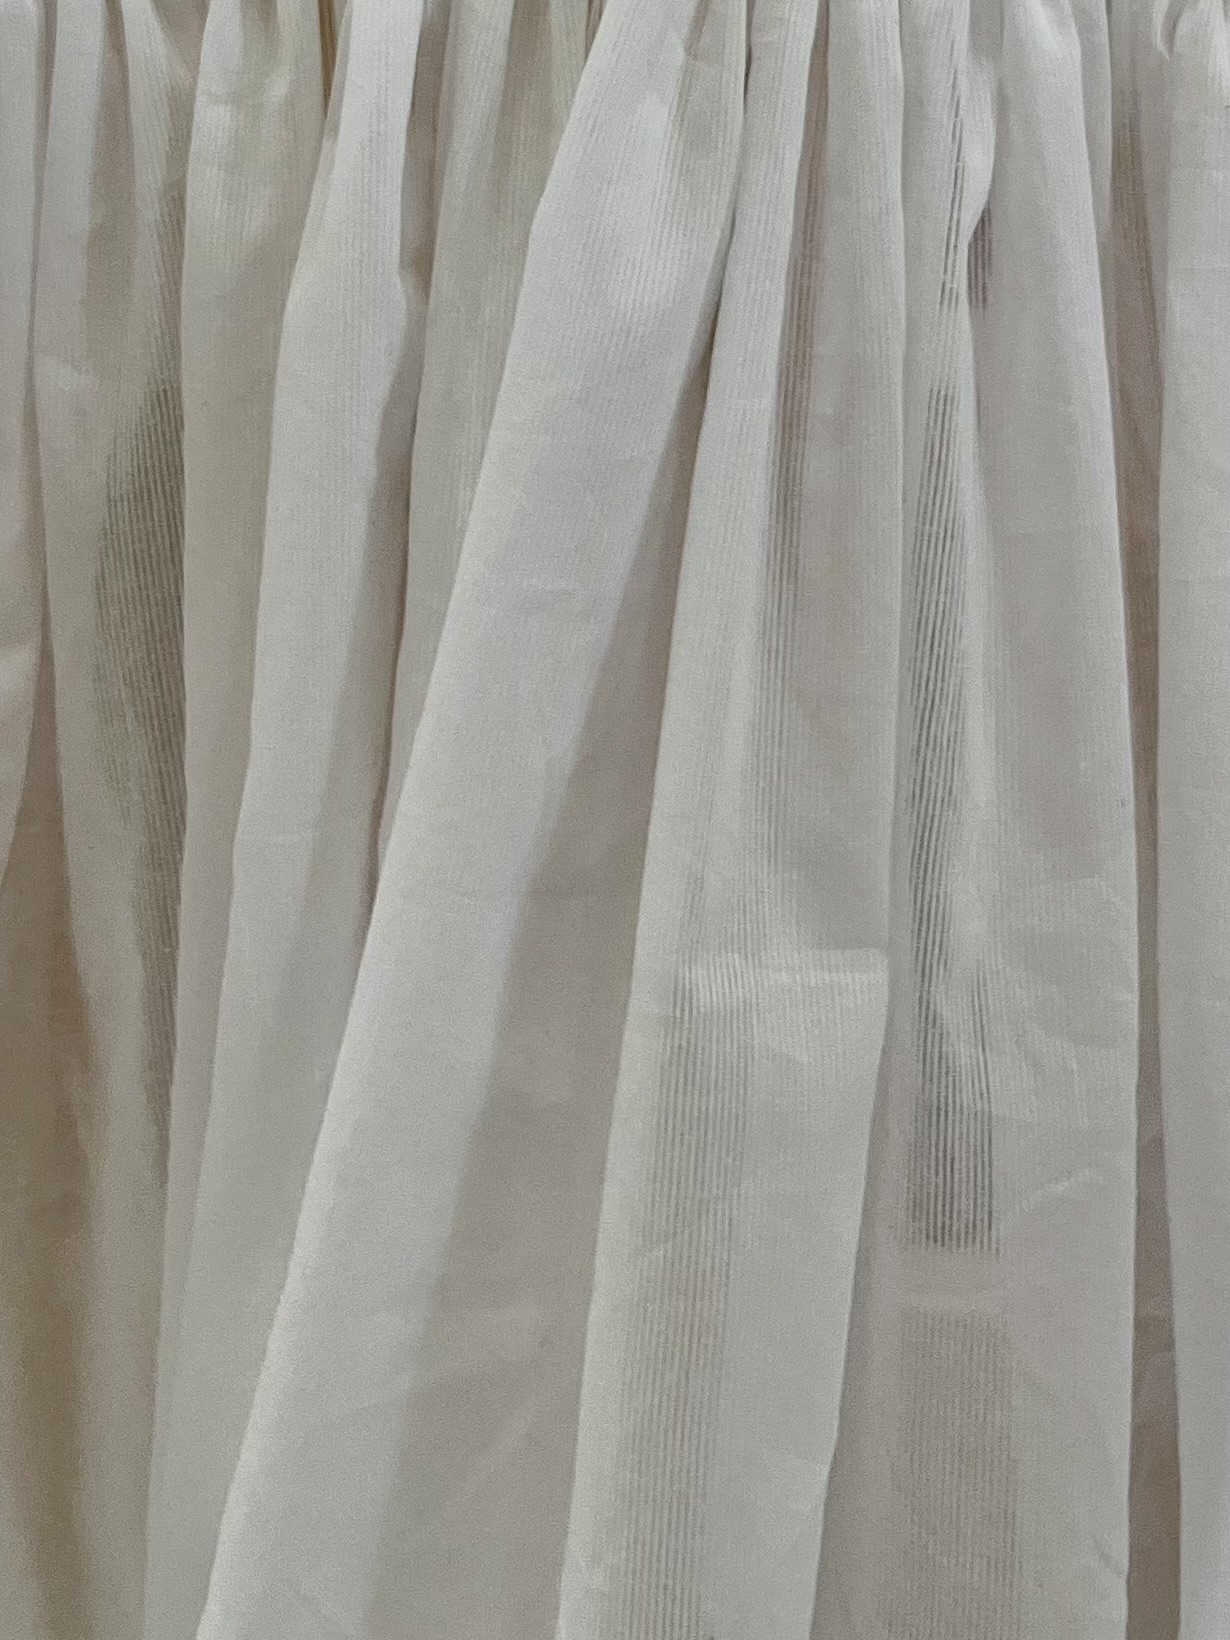 A gathered length of semi-sheer cotton with fine white stripes.
